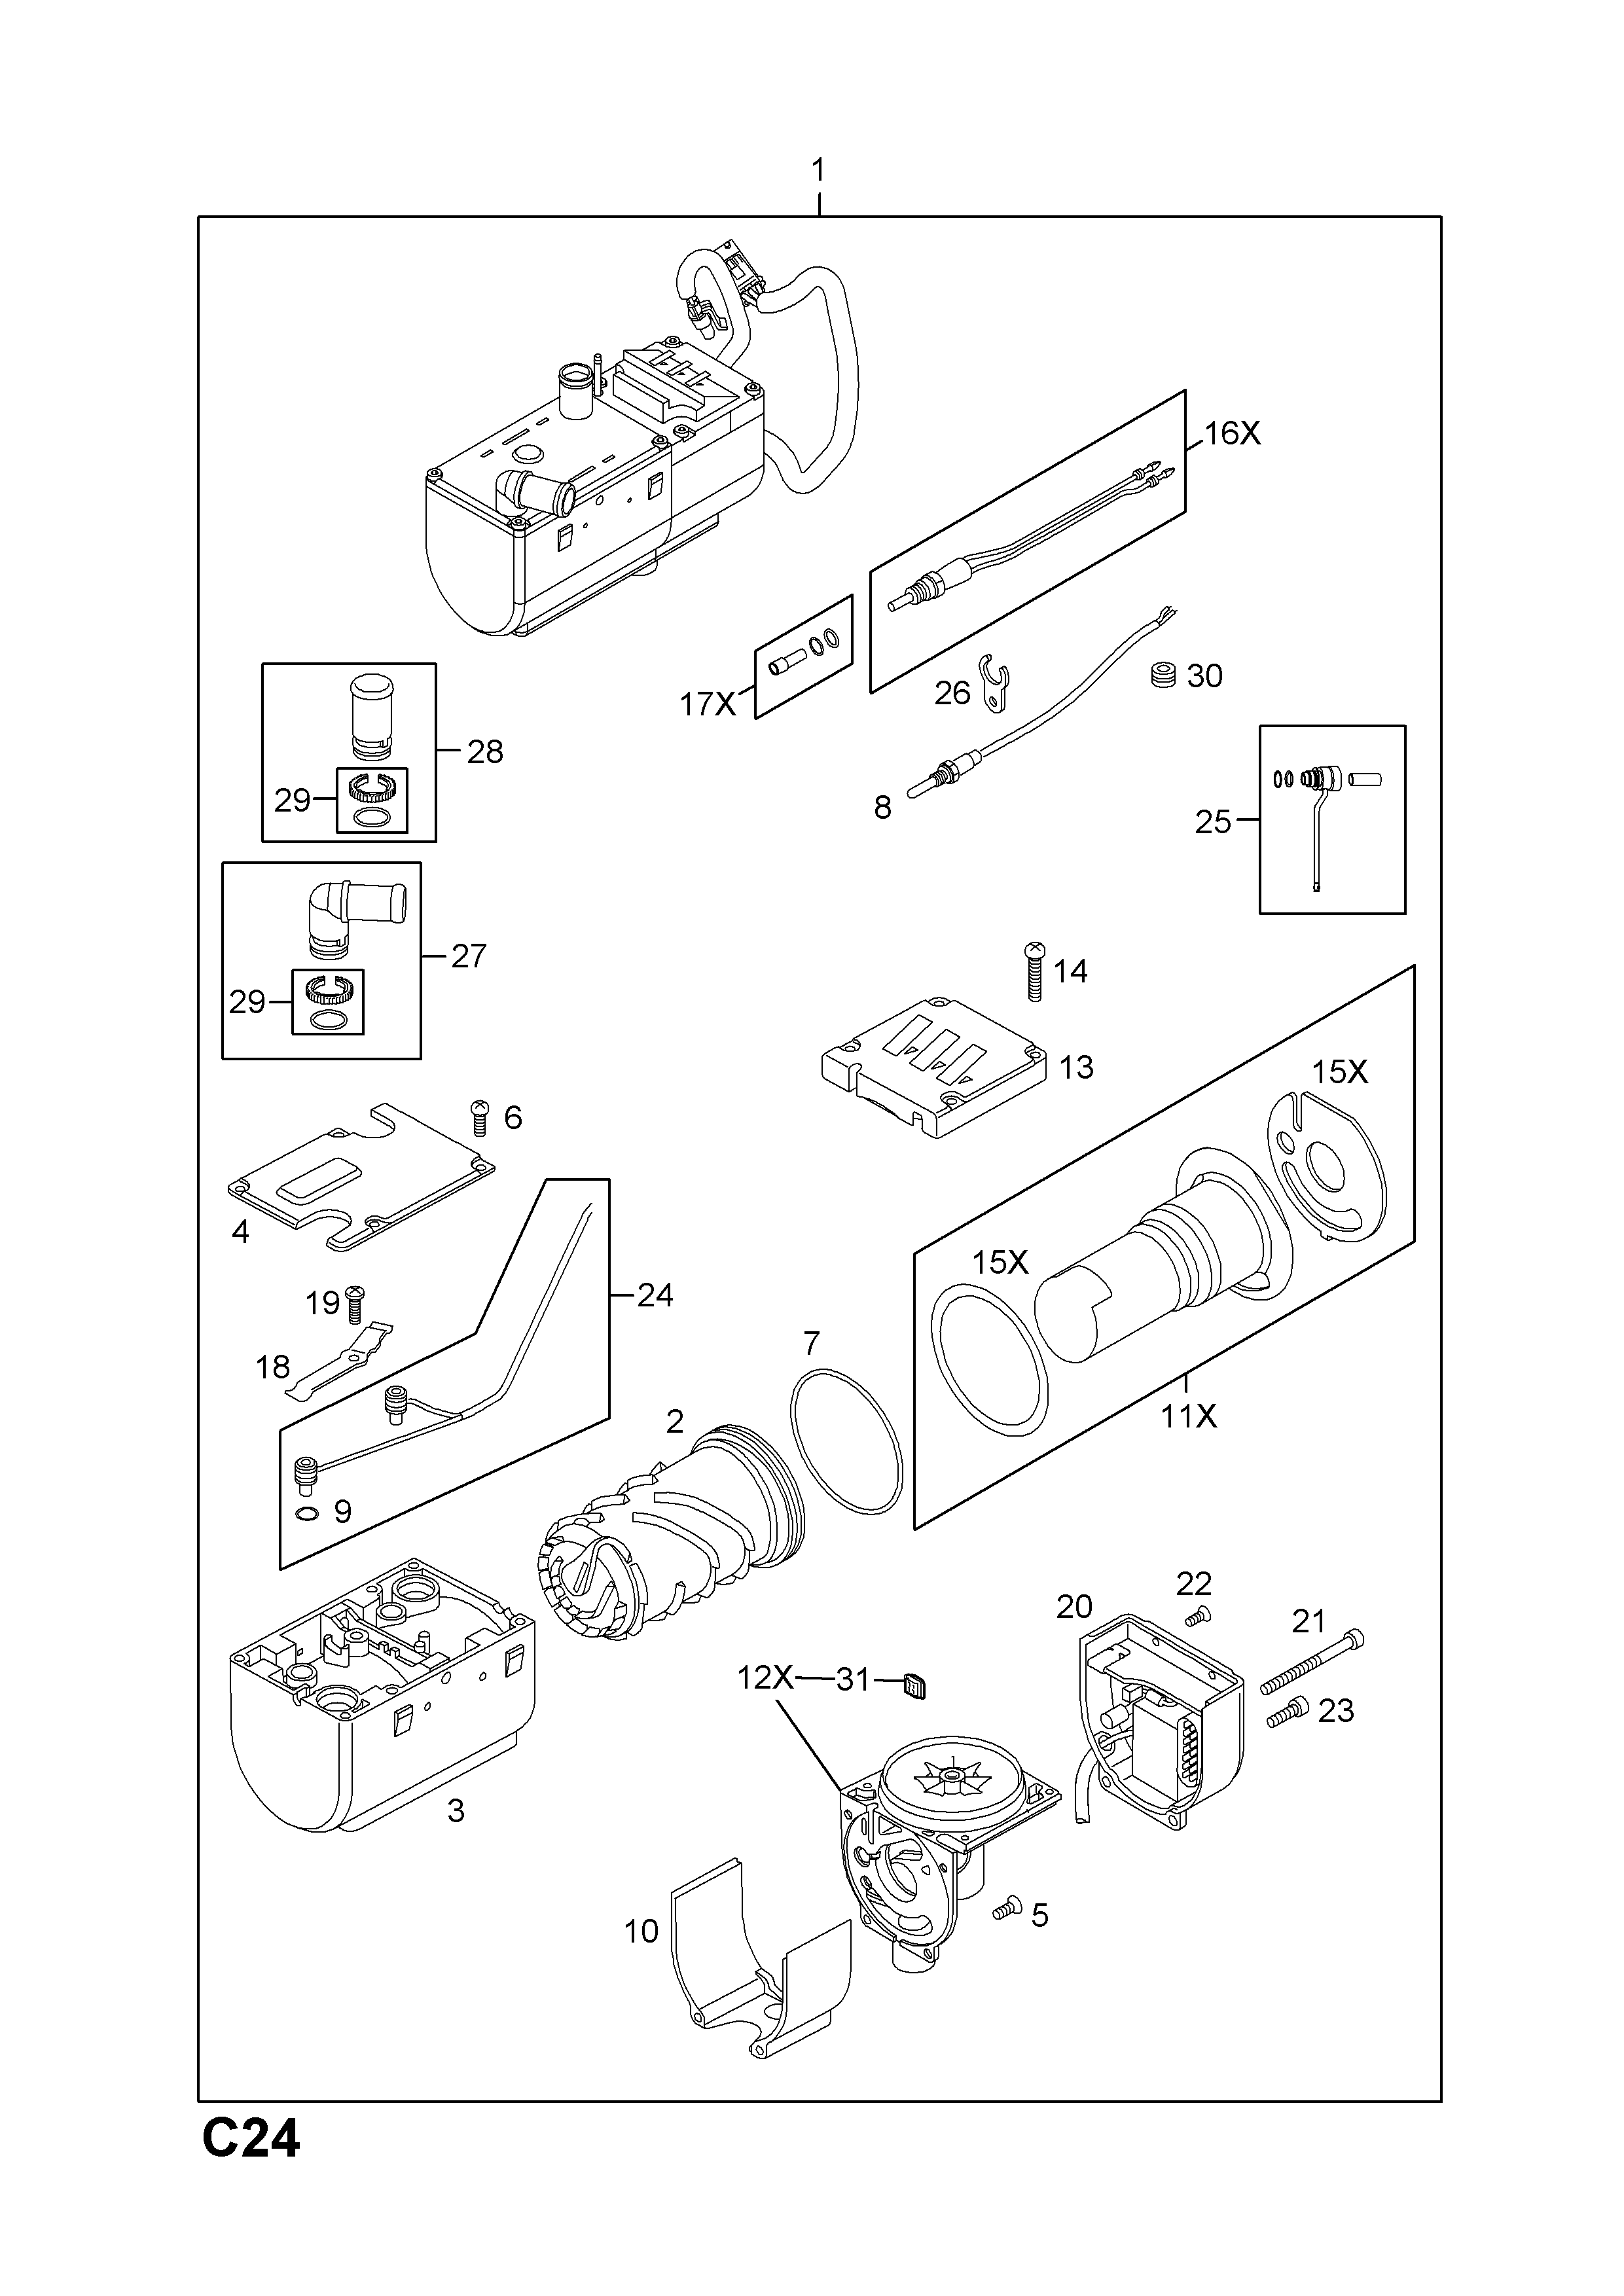 AUXILIARY HEATER AND PARKING HEATER